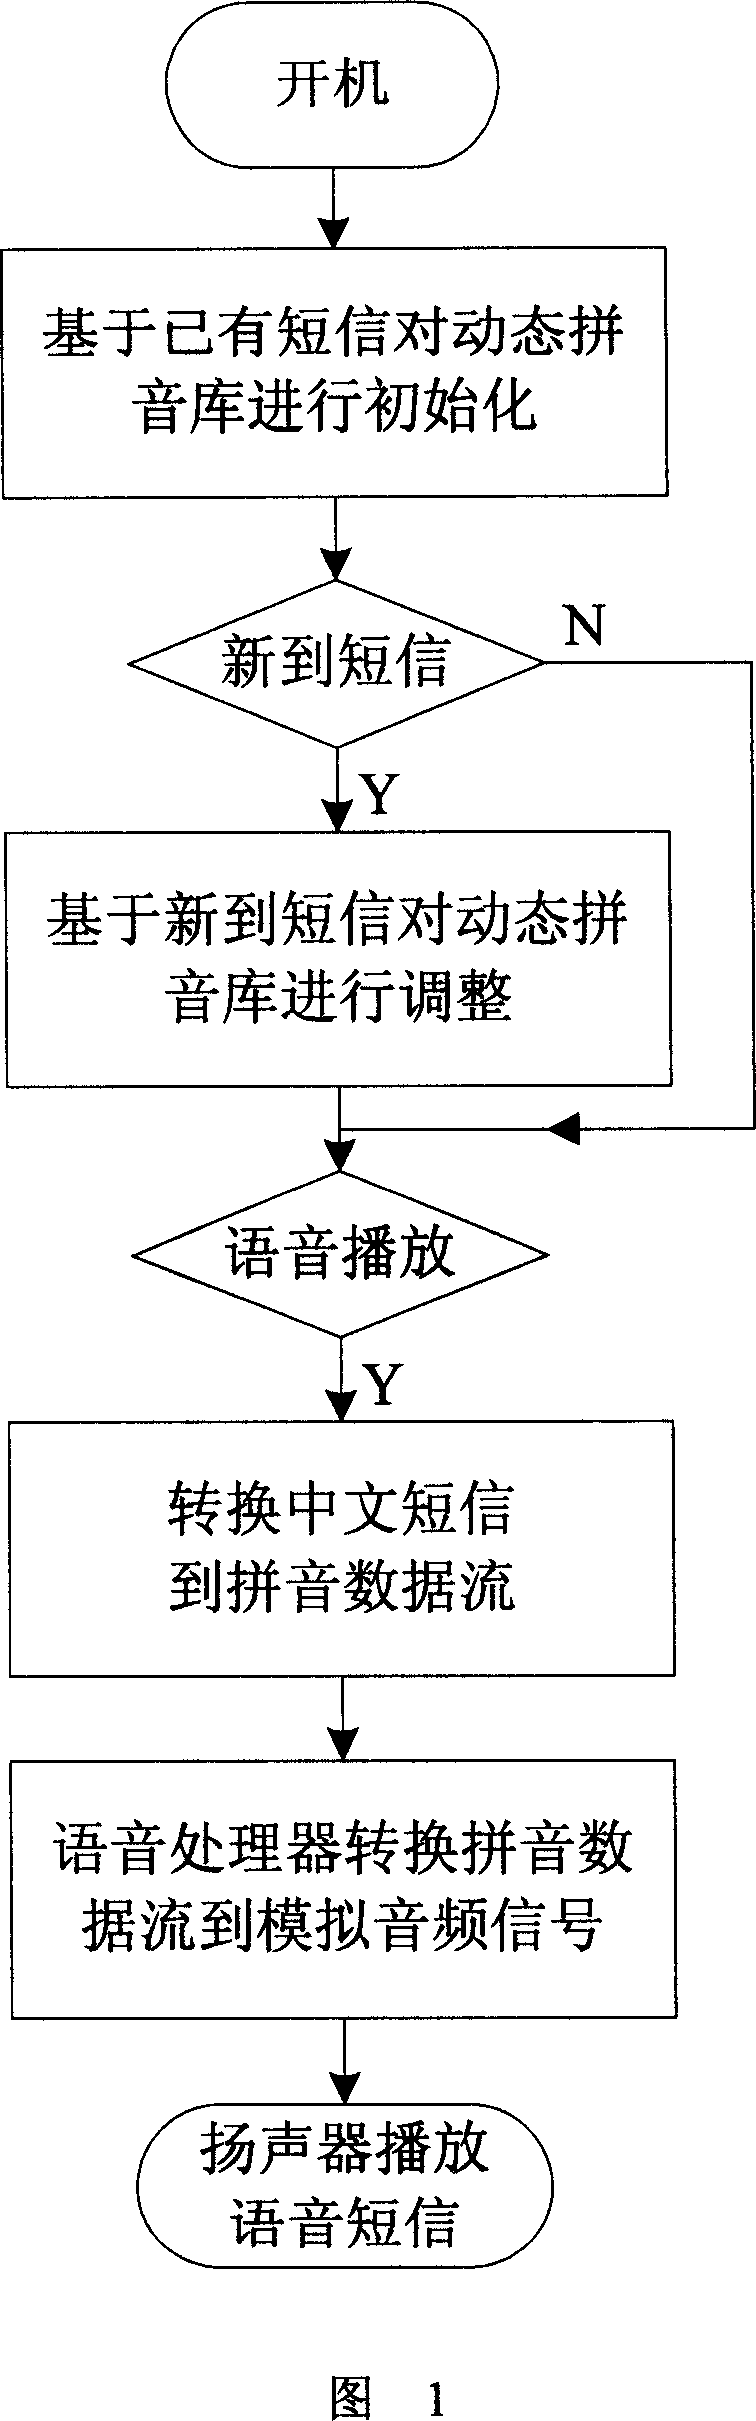 Method of converting text note to voice broadcast in mobile phone